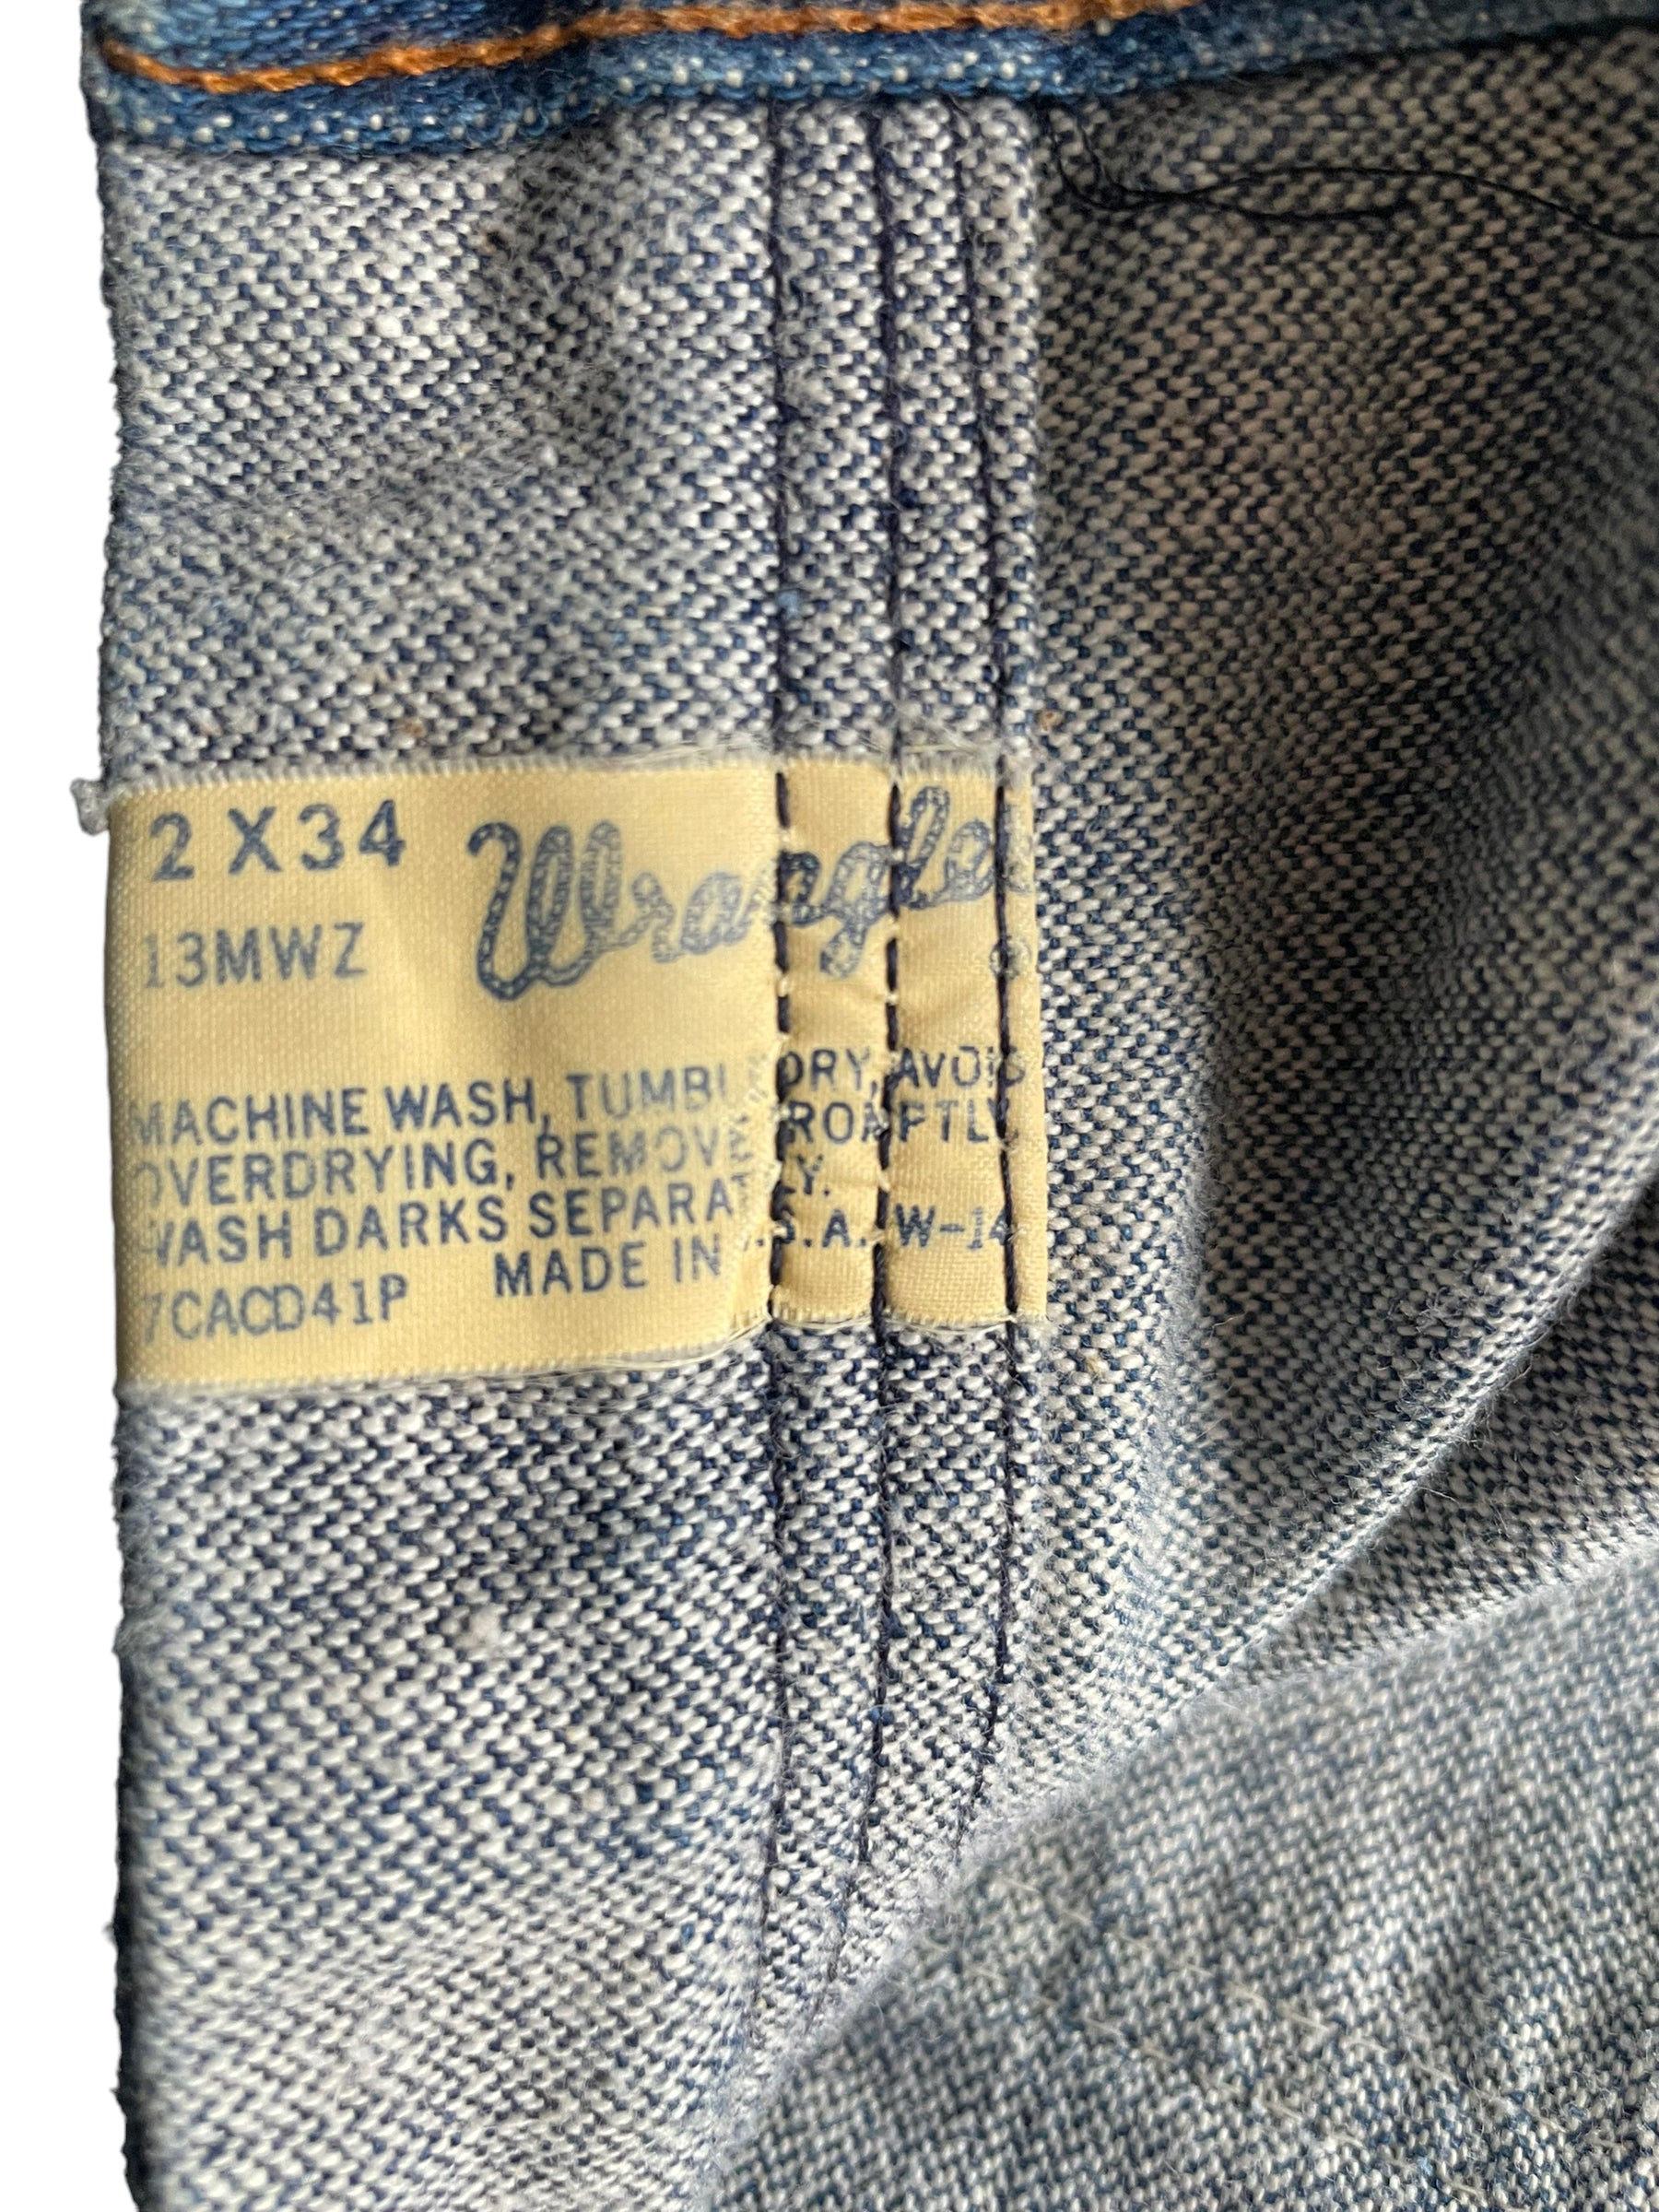 Inside tag view of Vintage 1960s Era Wranglers 32x34